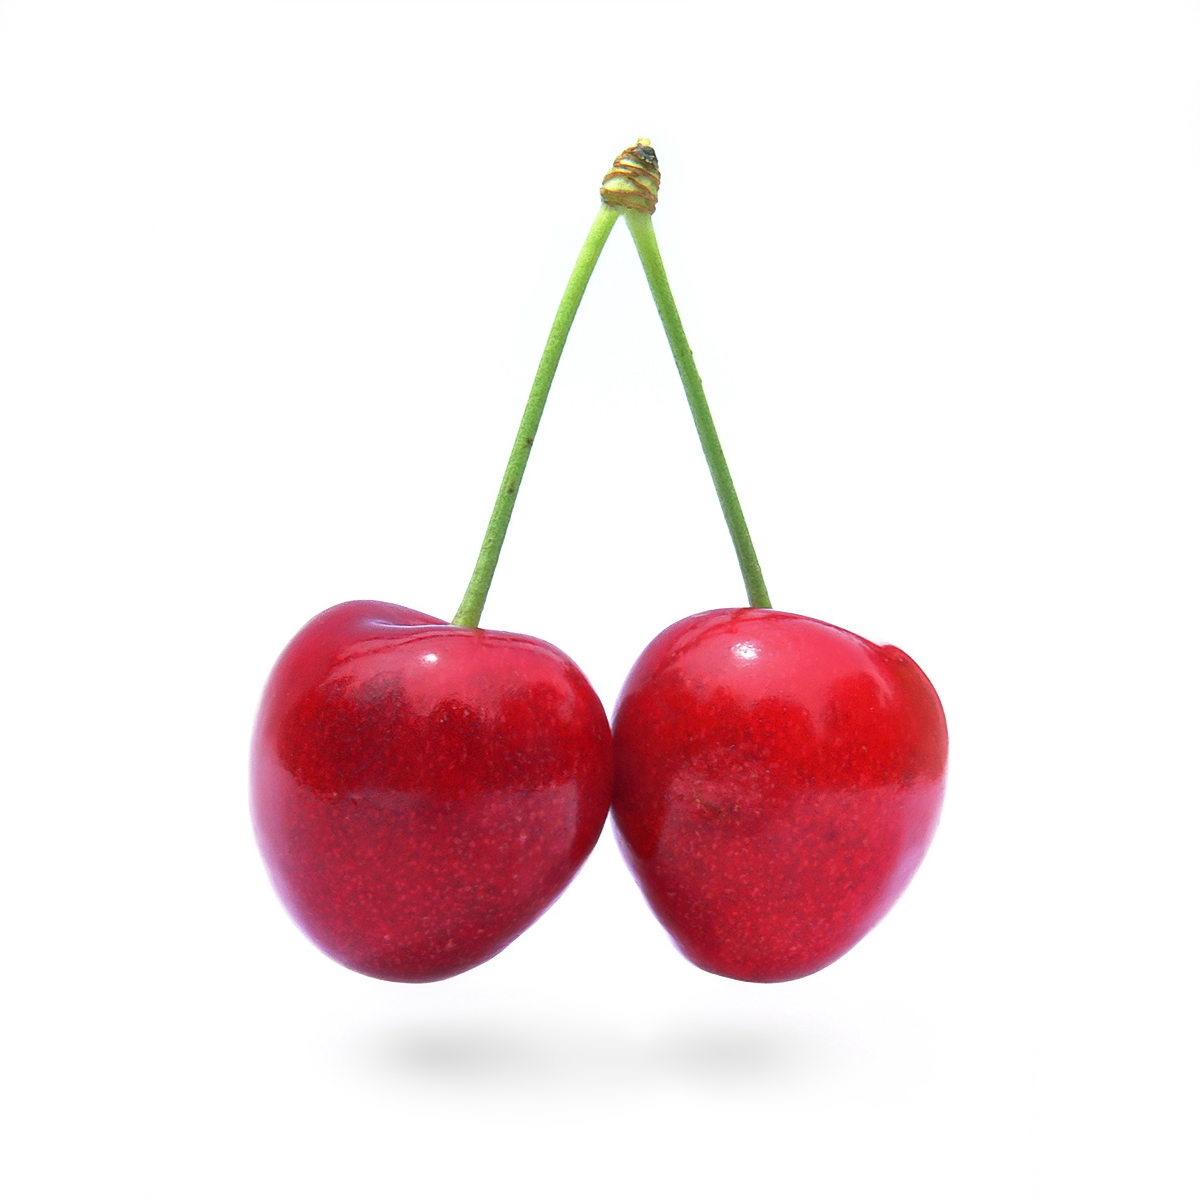 Properties of Cherry for body health and treatment of disease